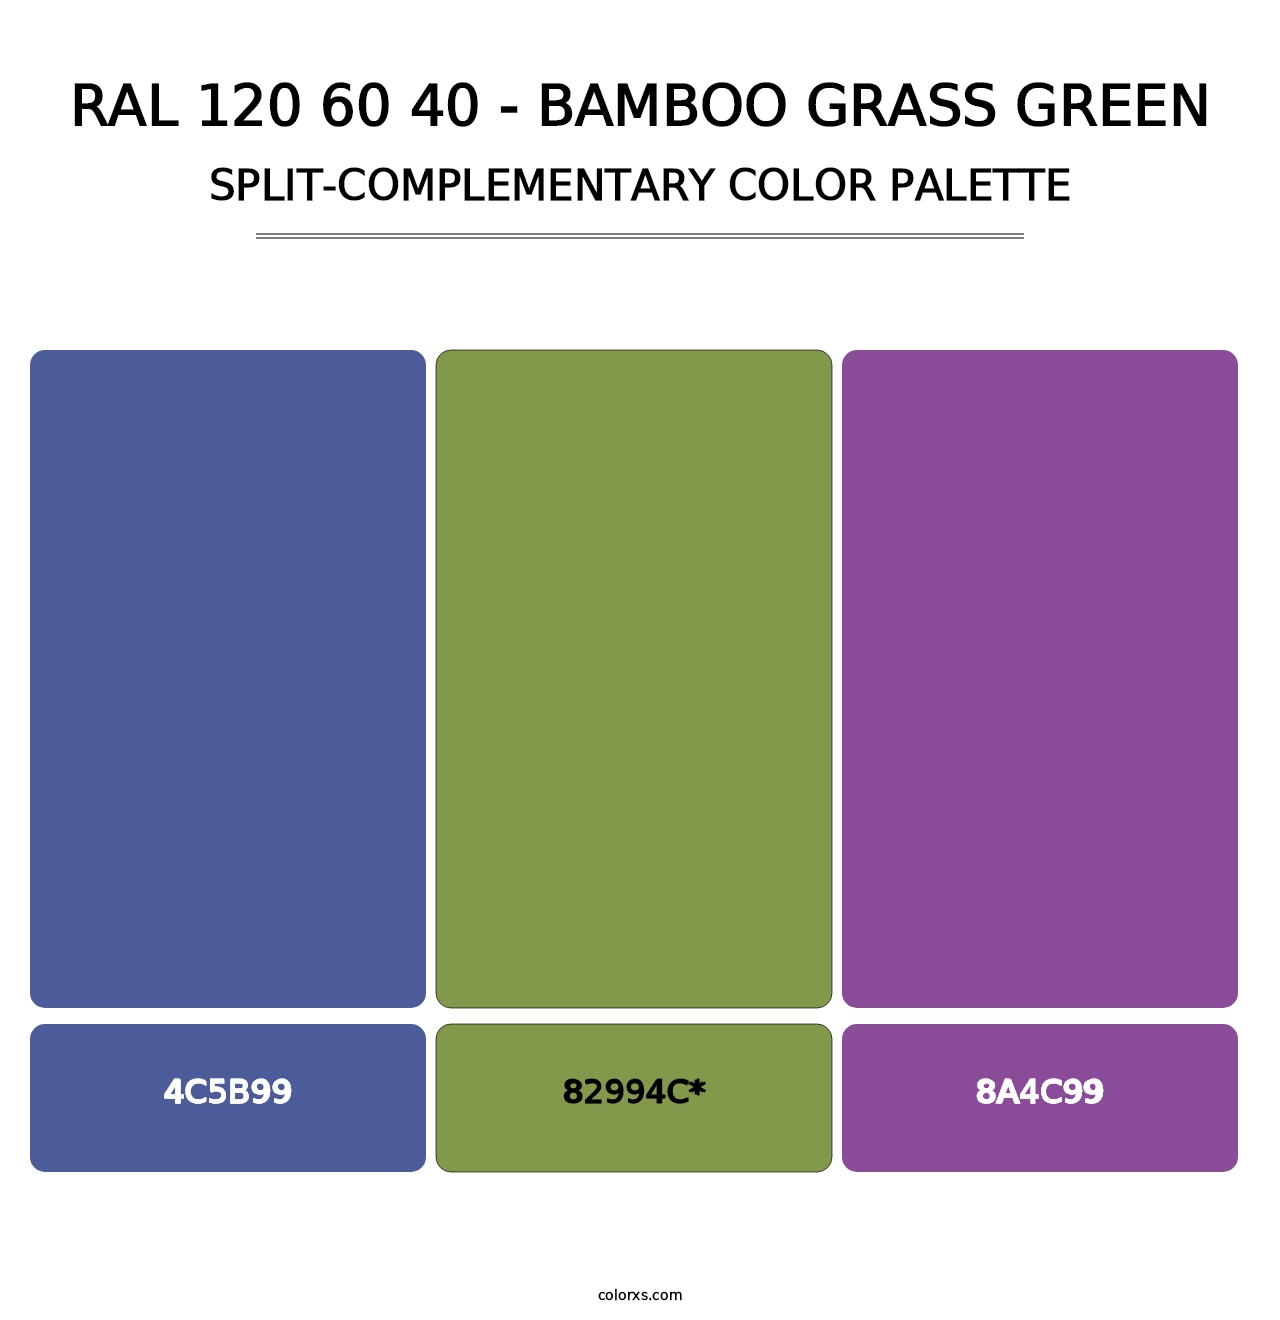 RAL 120 60 40 - Bamboo Grass Green - Split-Complementary Color Palette